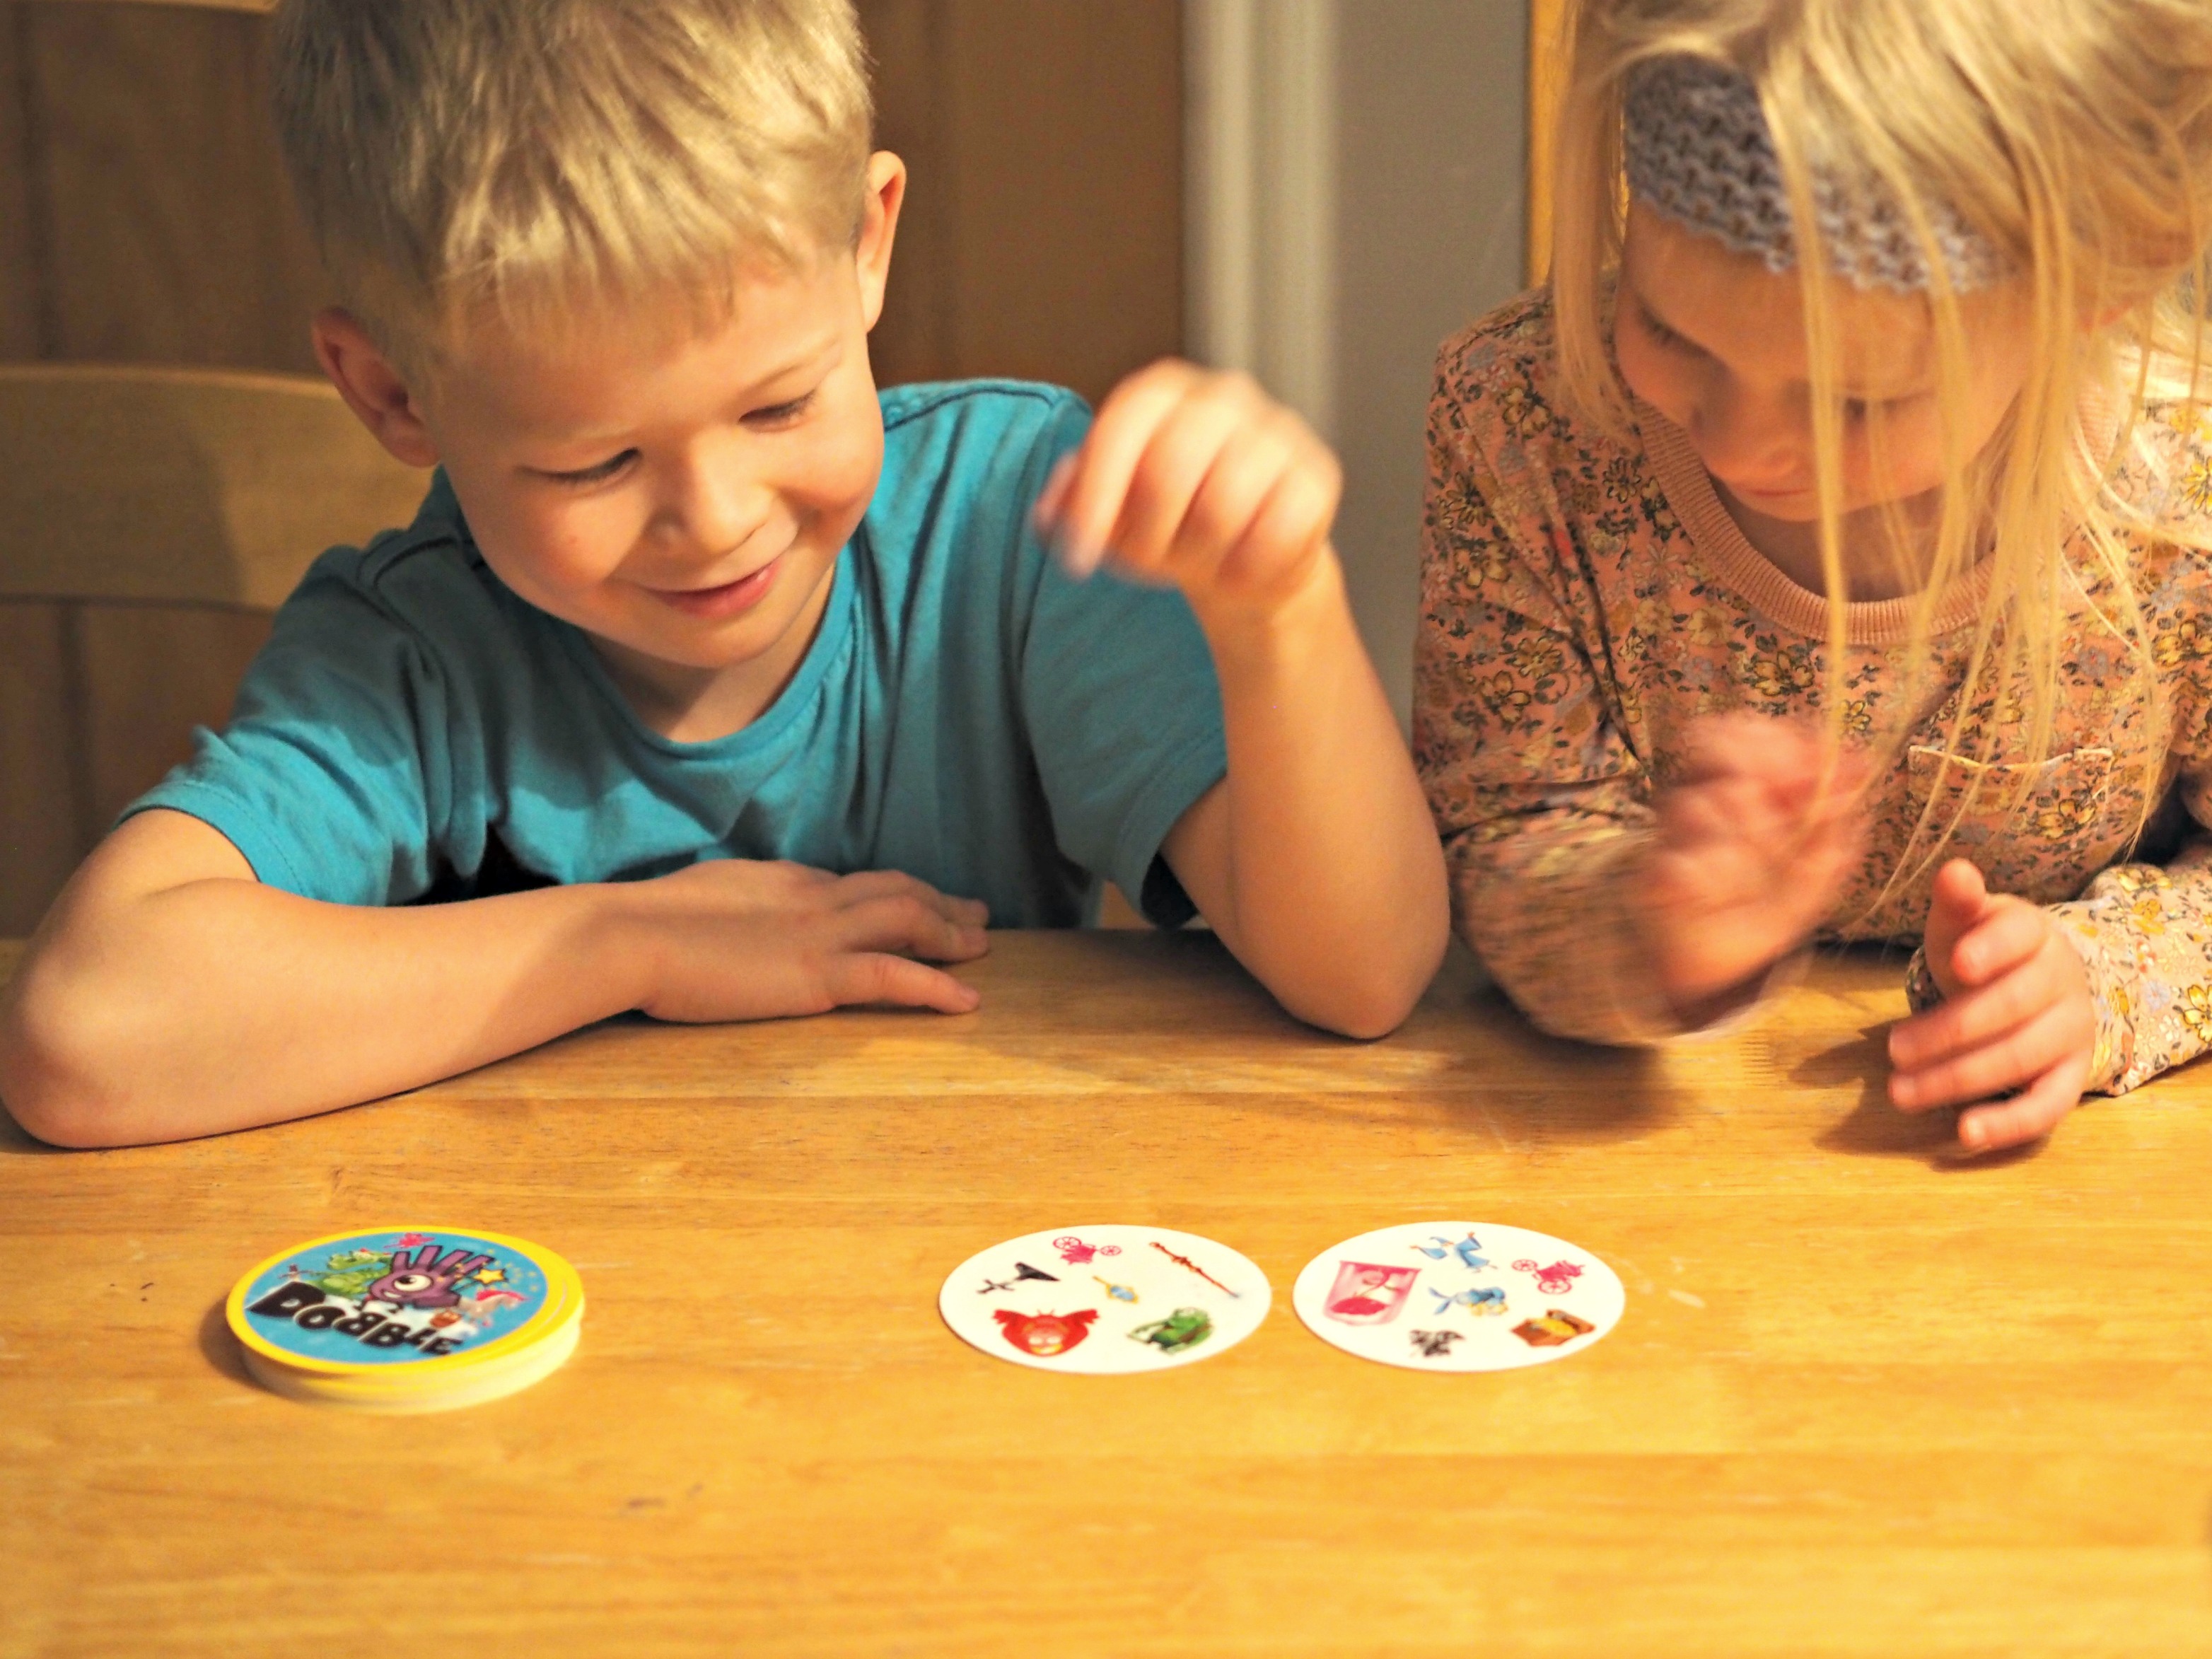 REVIEW: Asmodee Dobble Junior and Cobra Paw Board Games - Laura